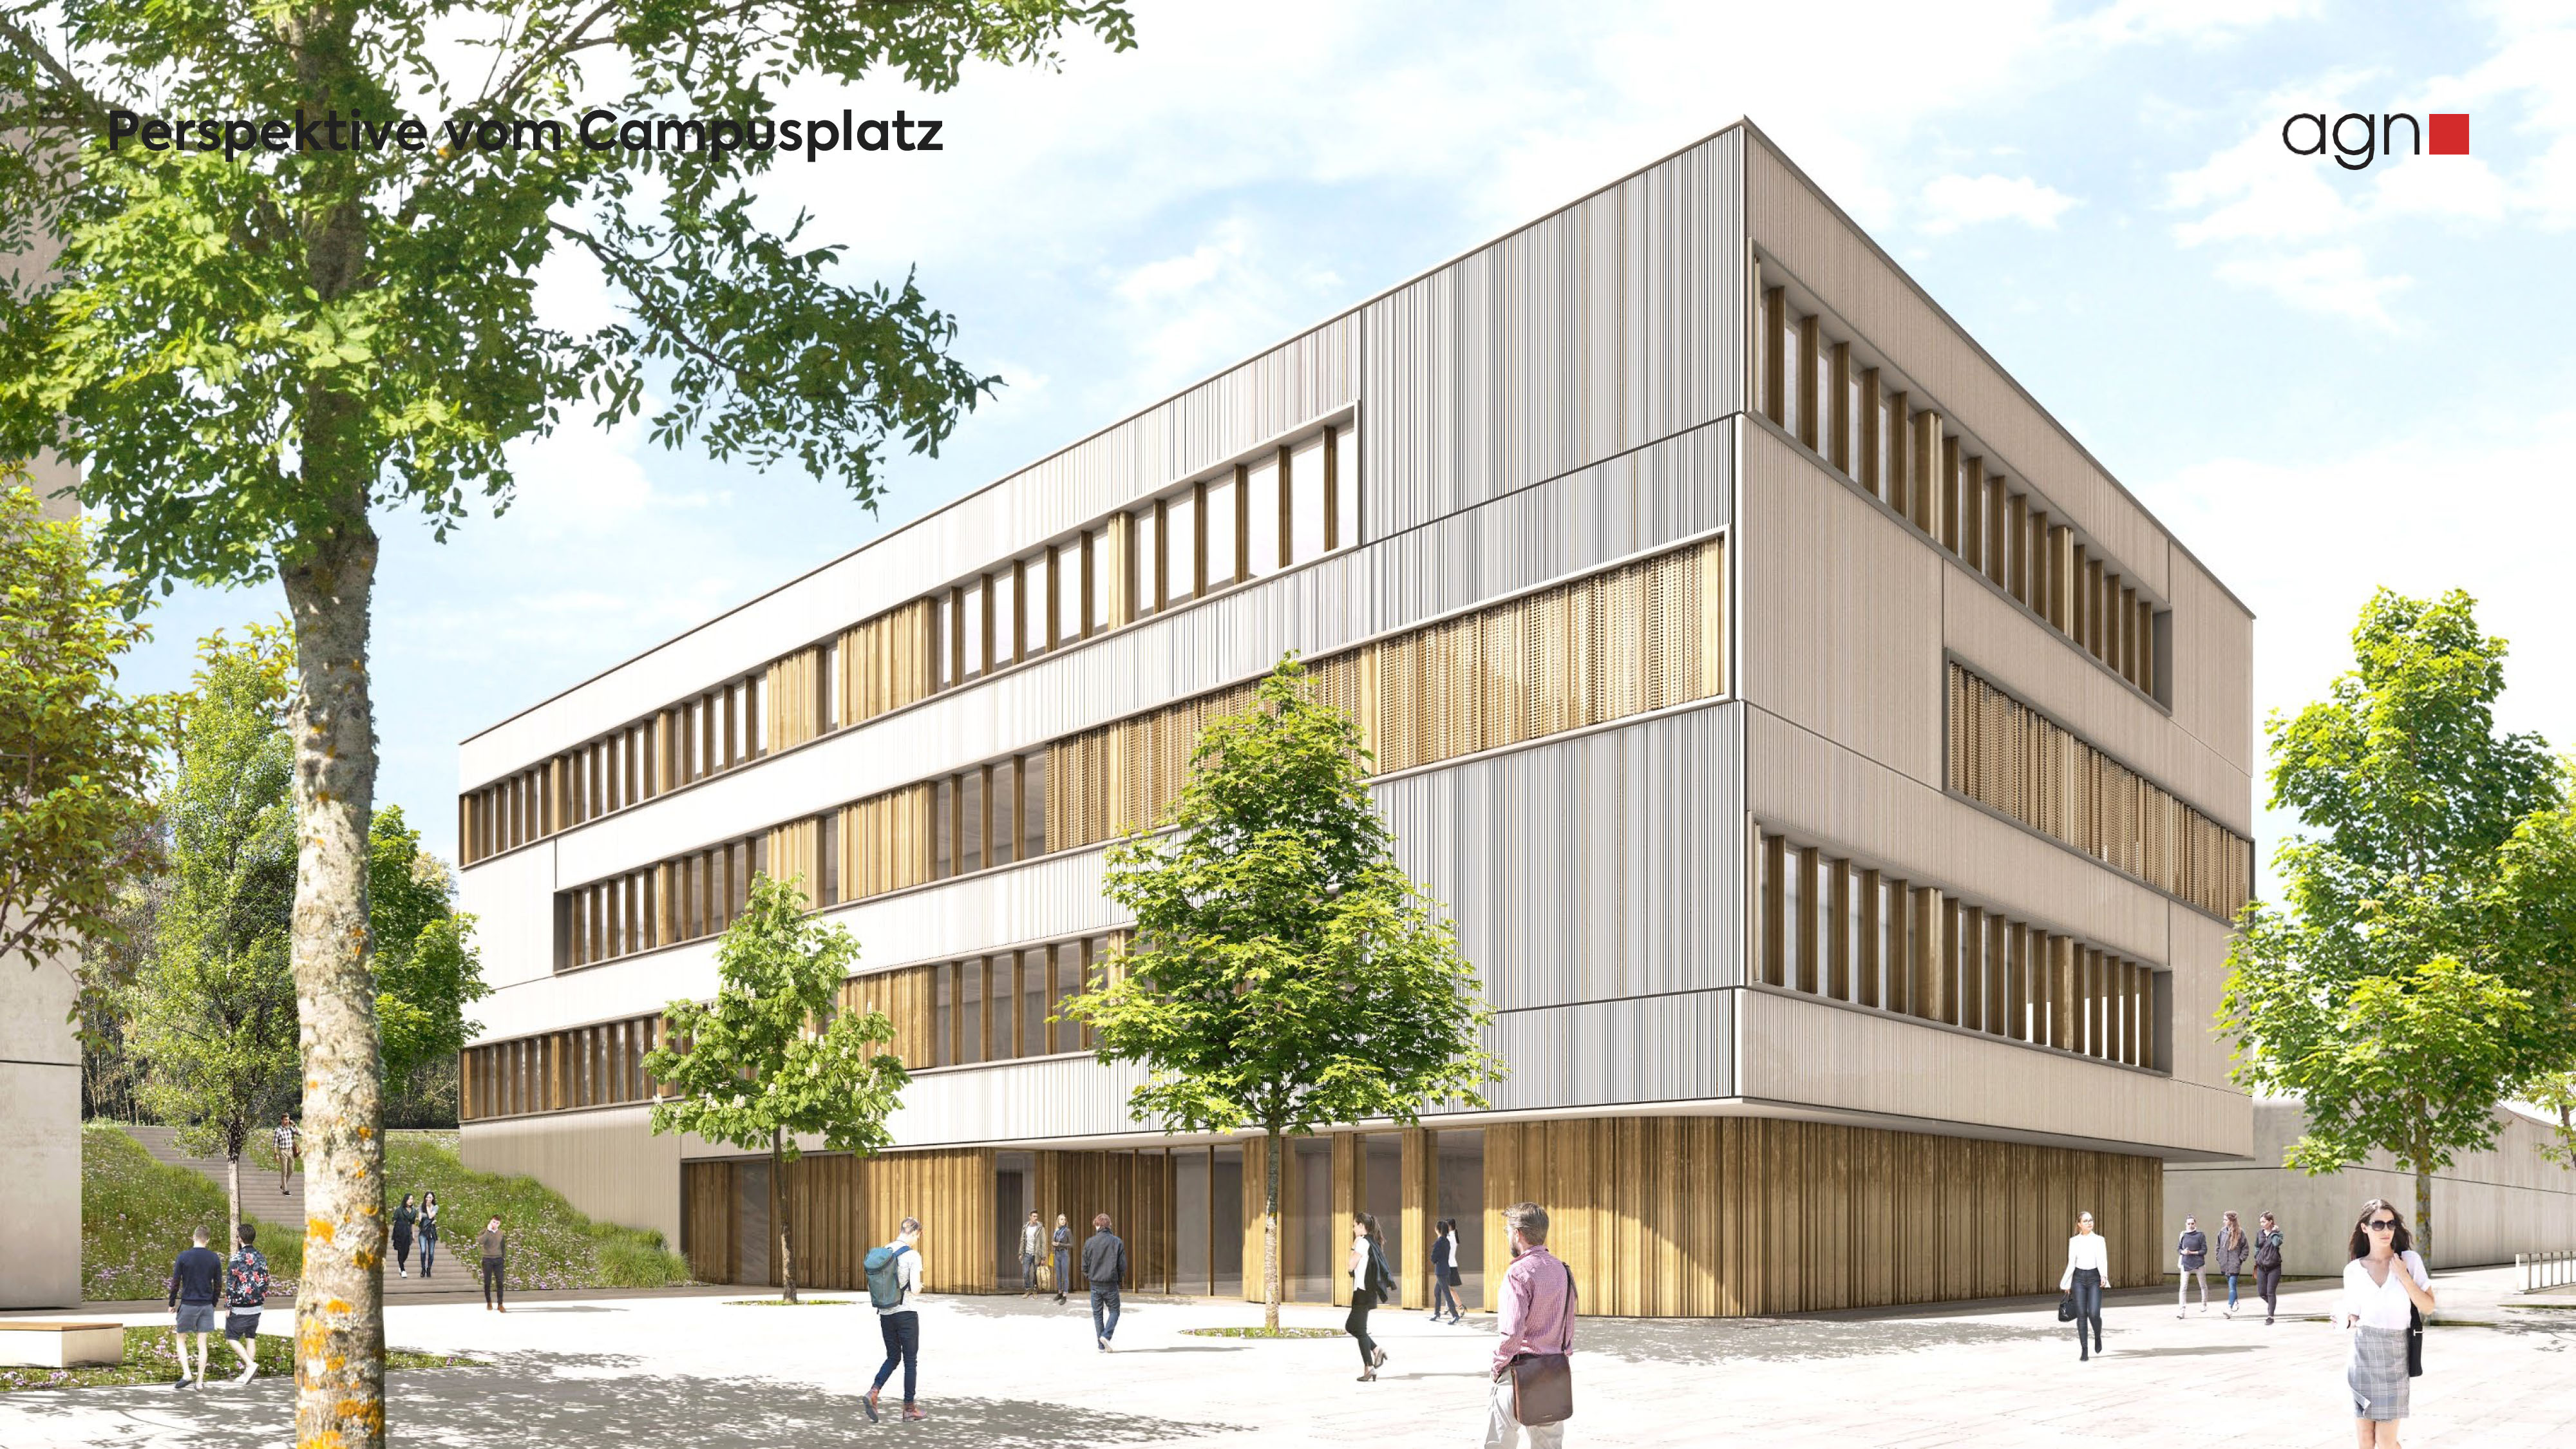 Visualisation of the new anatomy building